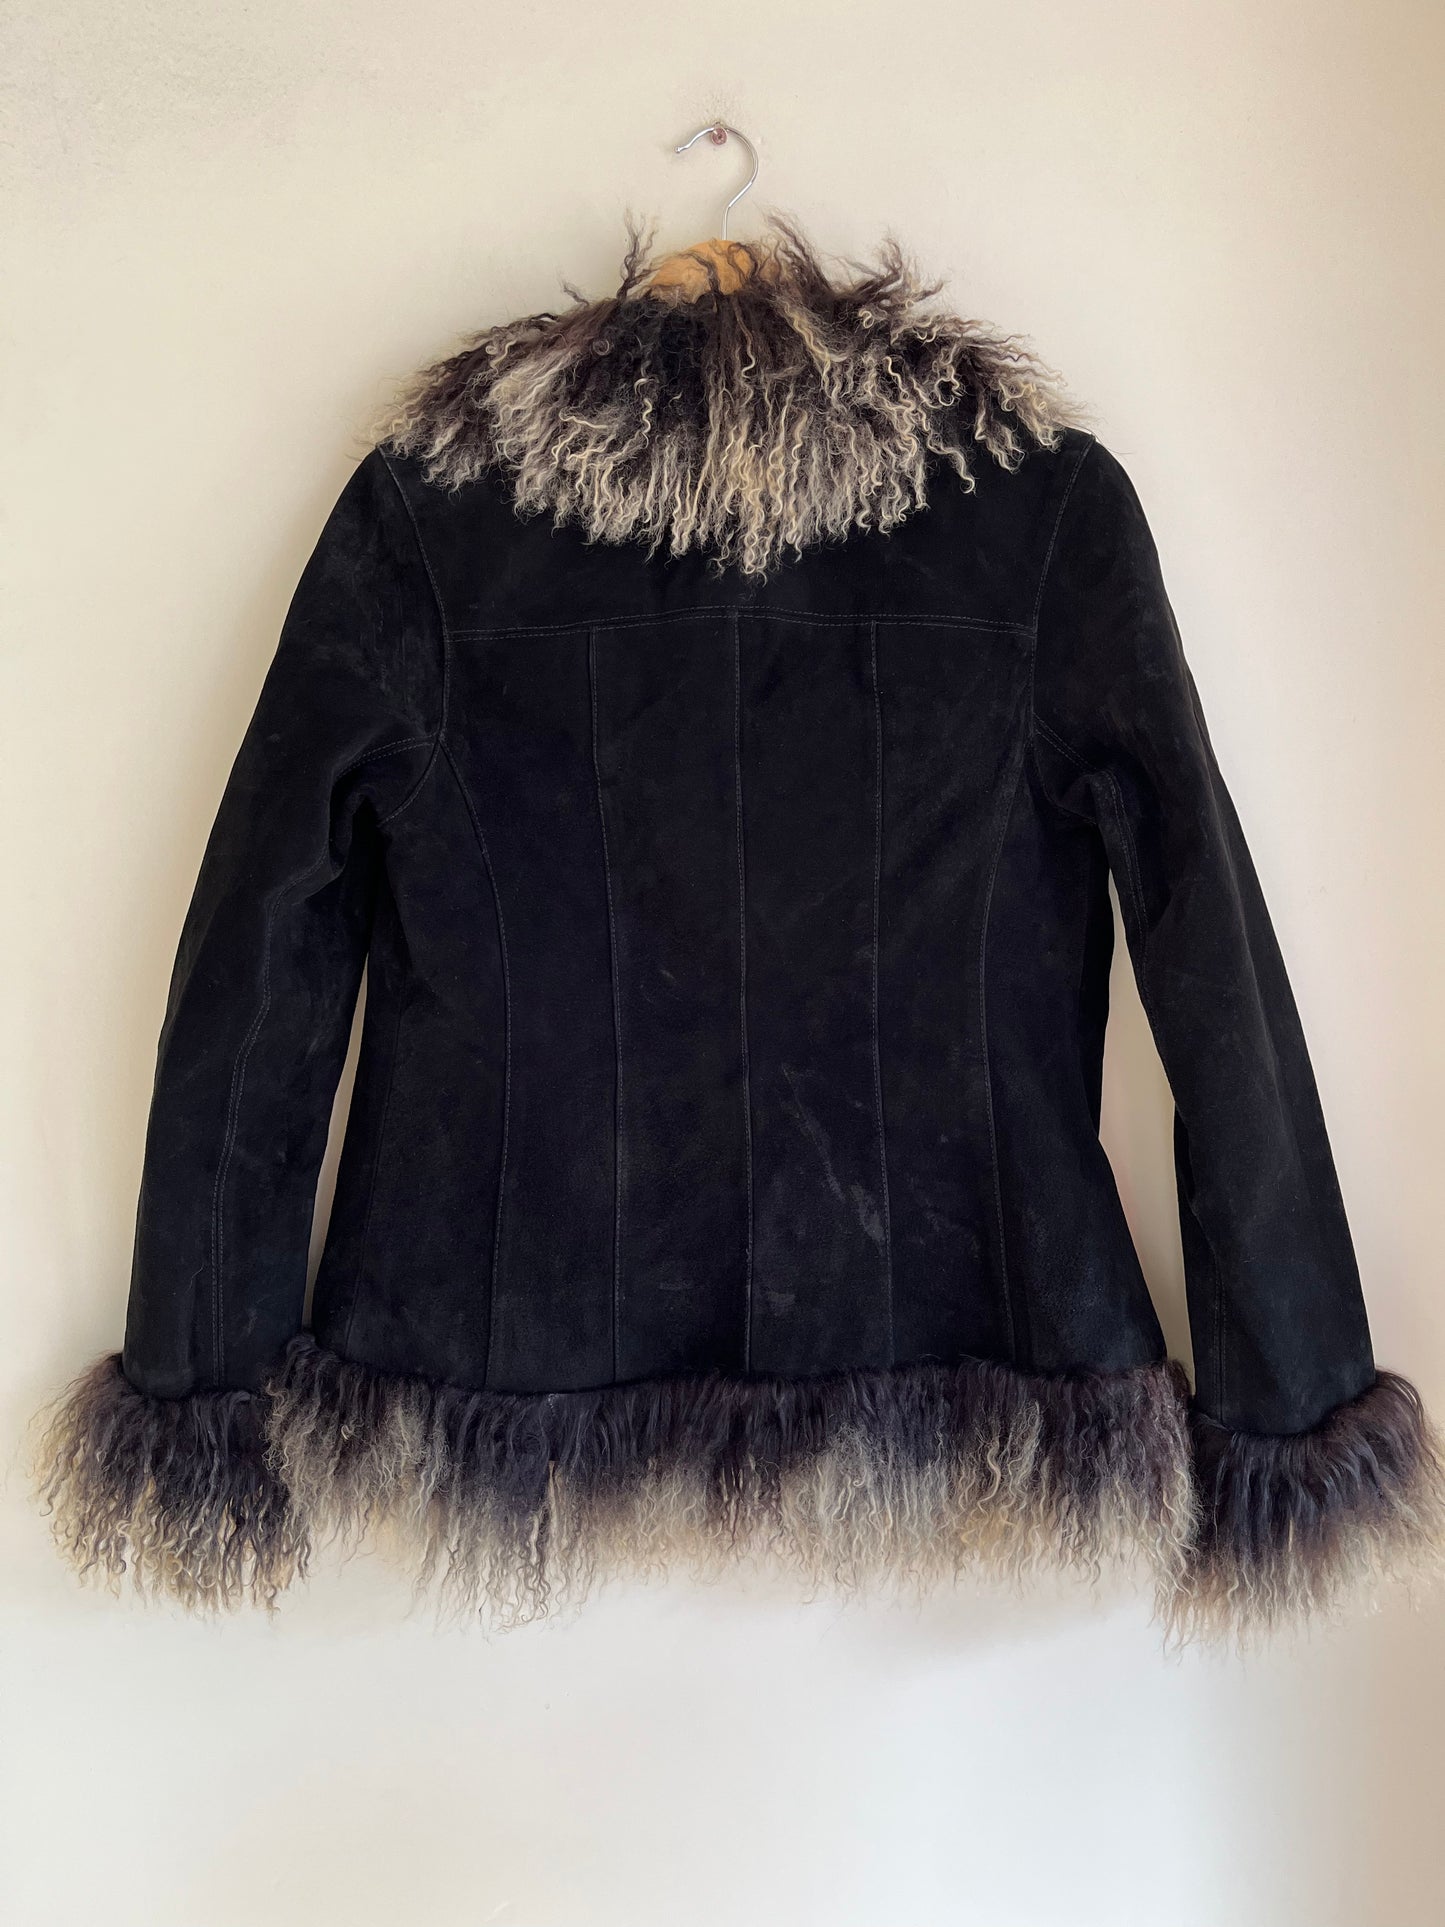 Monsoon Black Suede Leather Shearling Coat